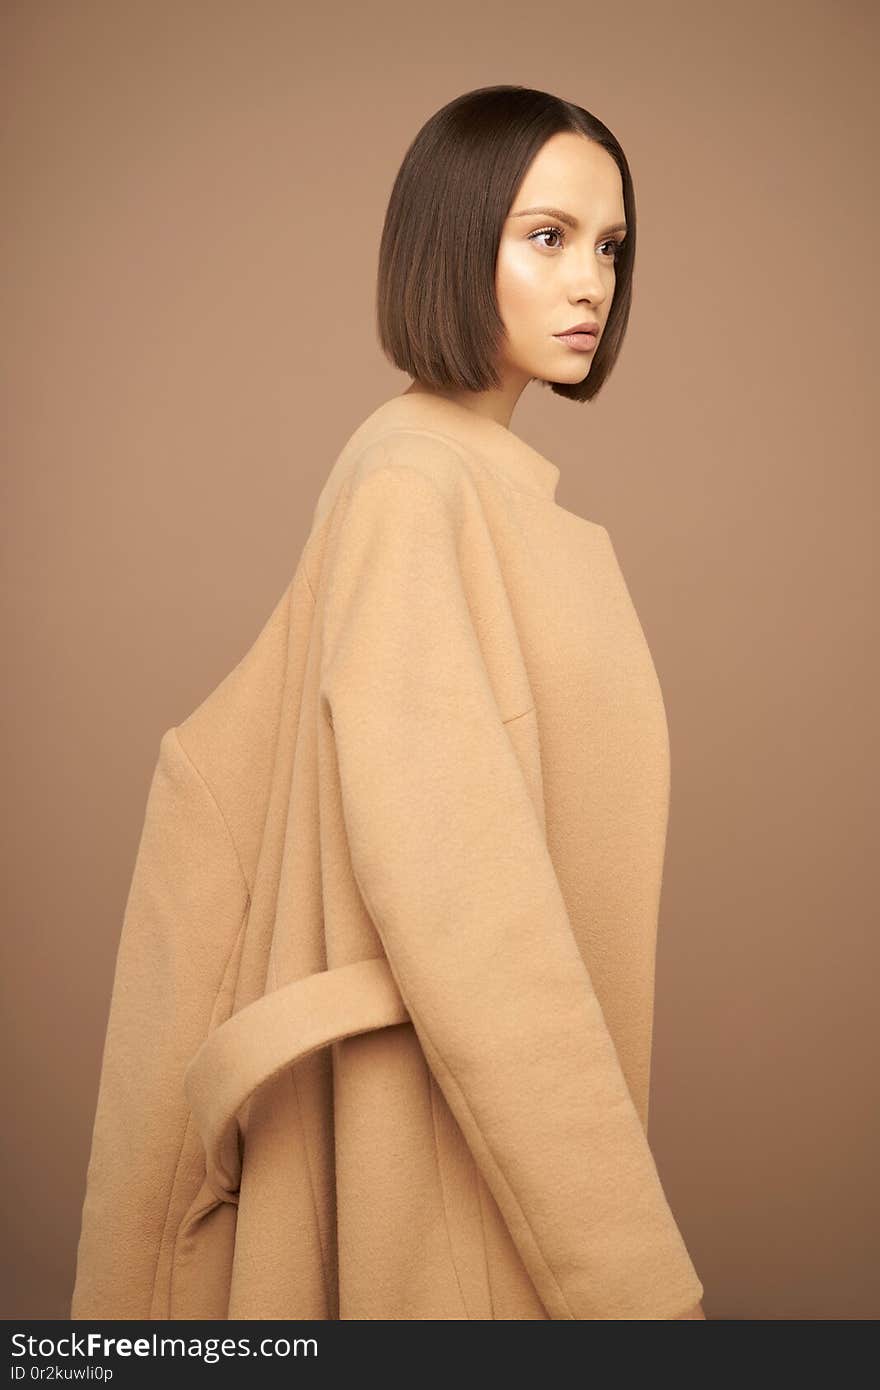 Fashion studio photo of young beautiful lady in beige coat on beige background. Total beige. Fashion look book. Warm Autumn. Warm Spring. Fashion studio photo of young beautiful lady in beige coat on beige background. Total beige. Fashion look book. Warm Autumn. Warm Spring